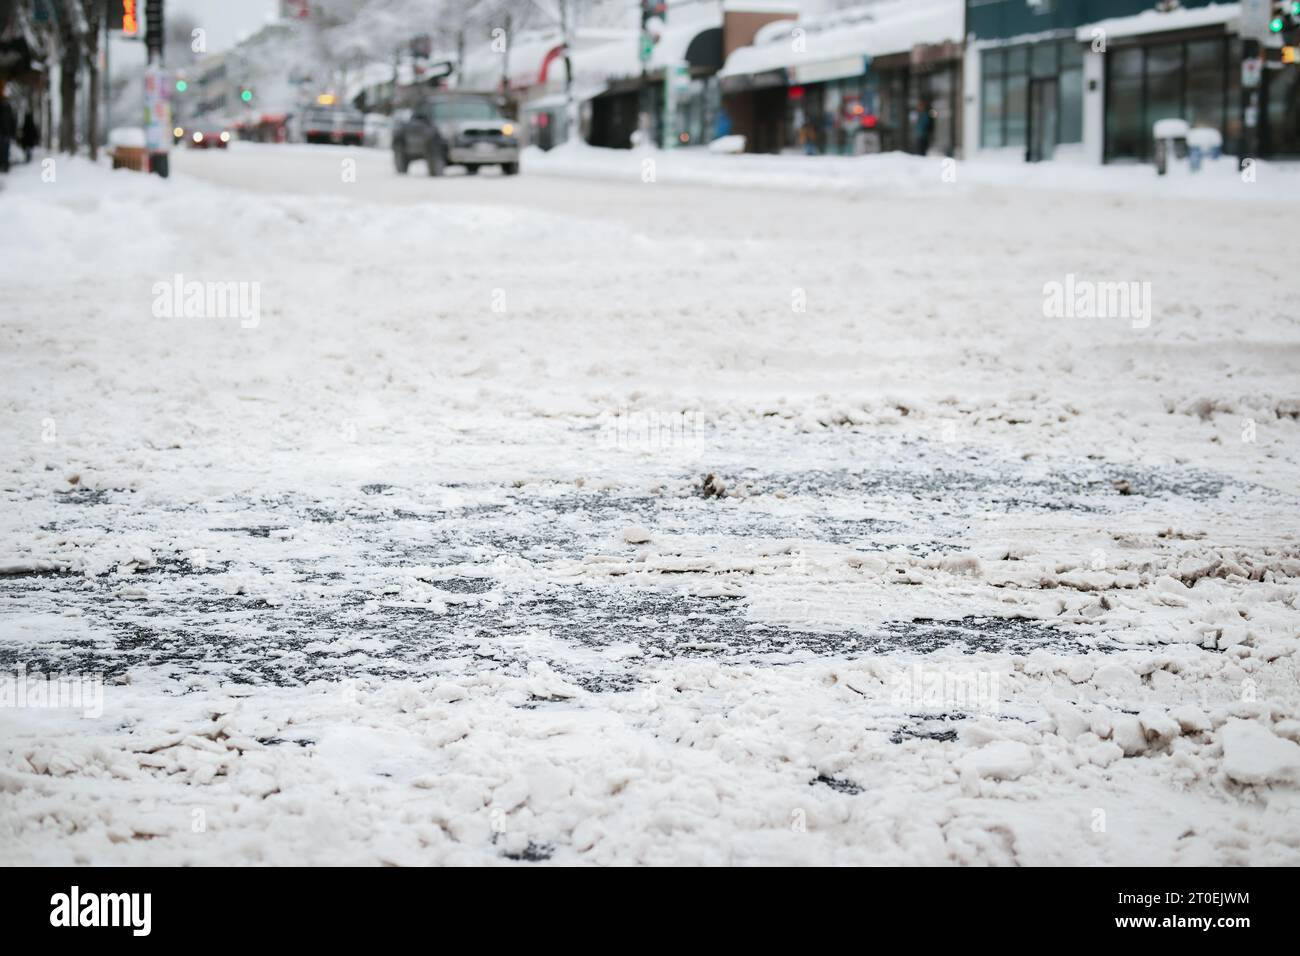 Snow covered city intersection, close up. Low angle view of main road not serviced or plowed with ice and slush. Stay at home and don't travel advice. Stock Photo